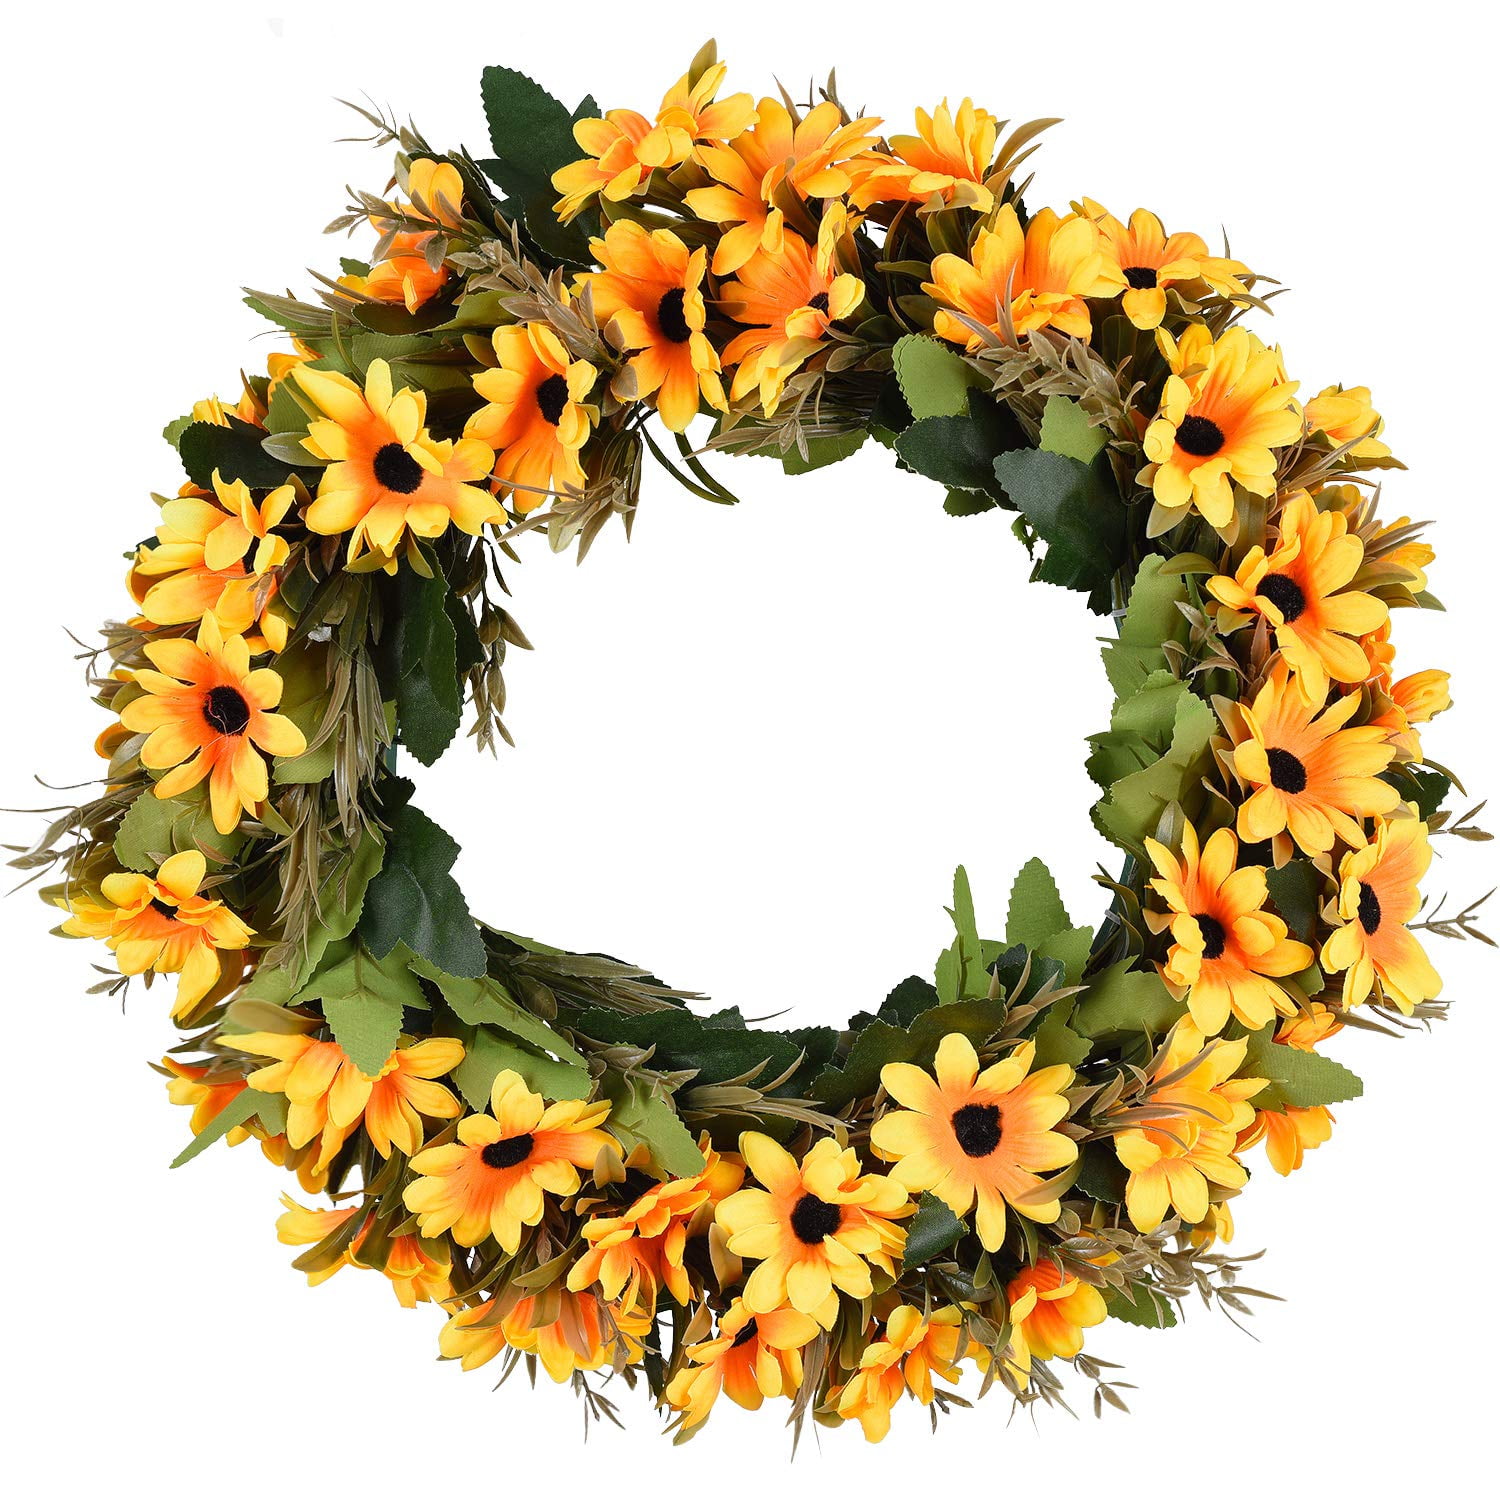 Year Round Floral Wreath Small Sunflower Wreath for Front Door Mini Floral Wreath Sunflower Wreath with Bow